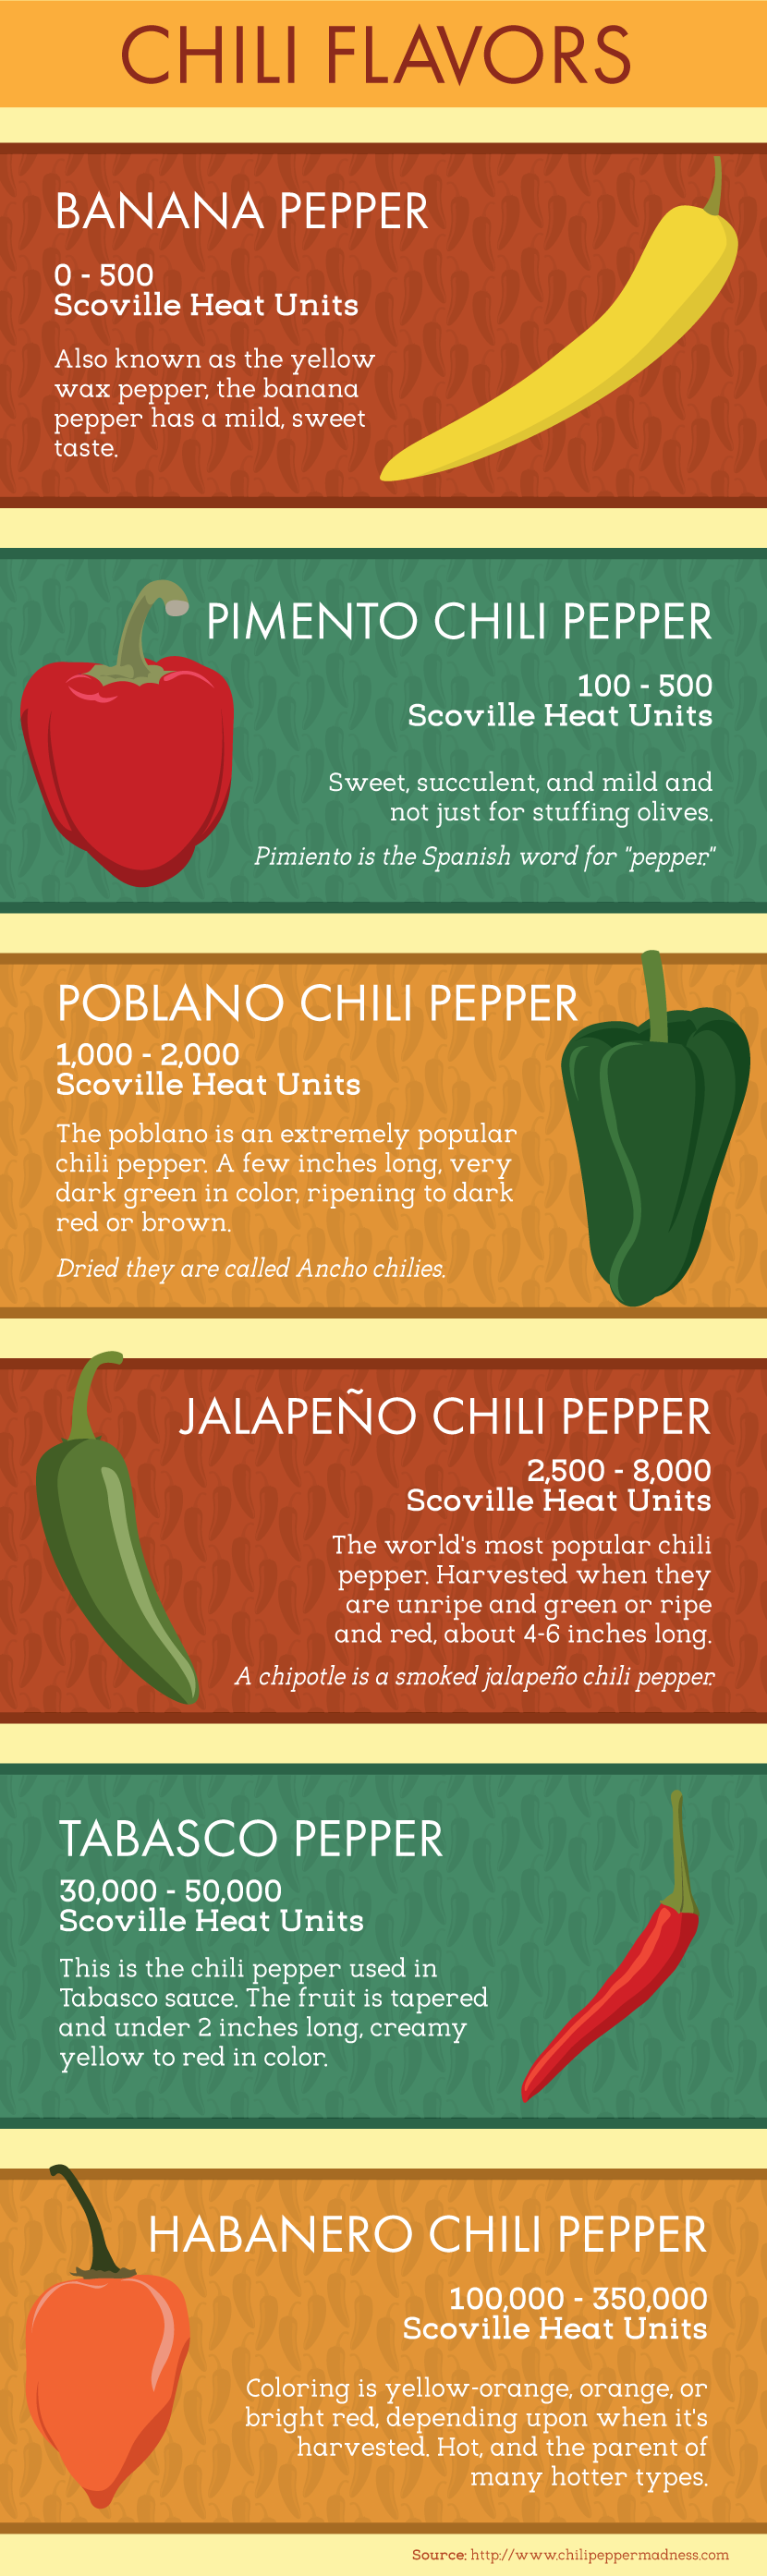 Growing Chilies: Popular Cultivars and Flavors